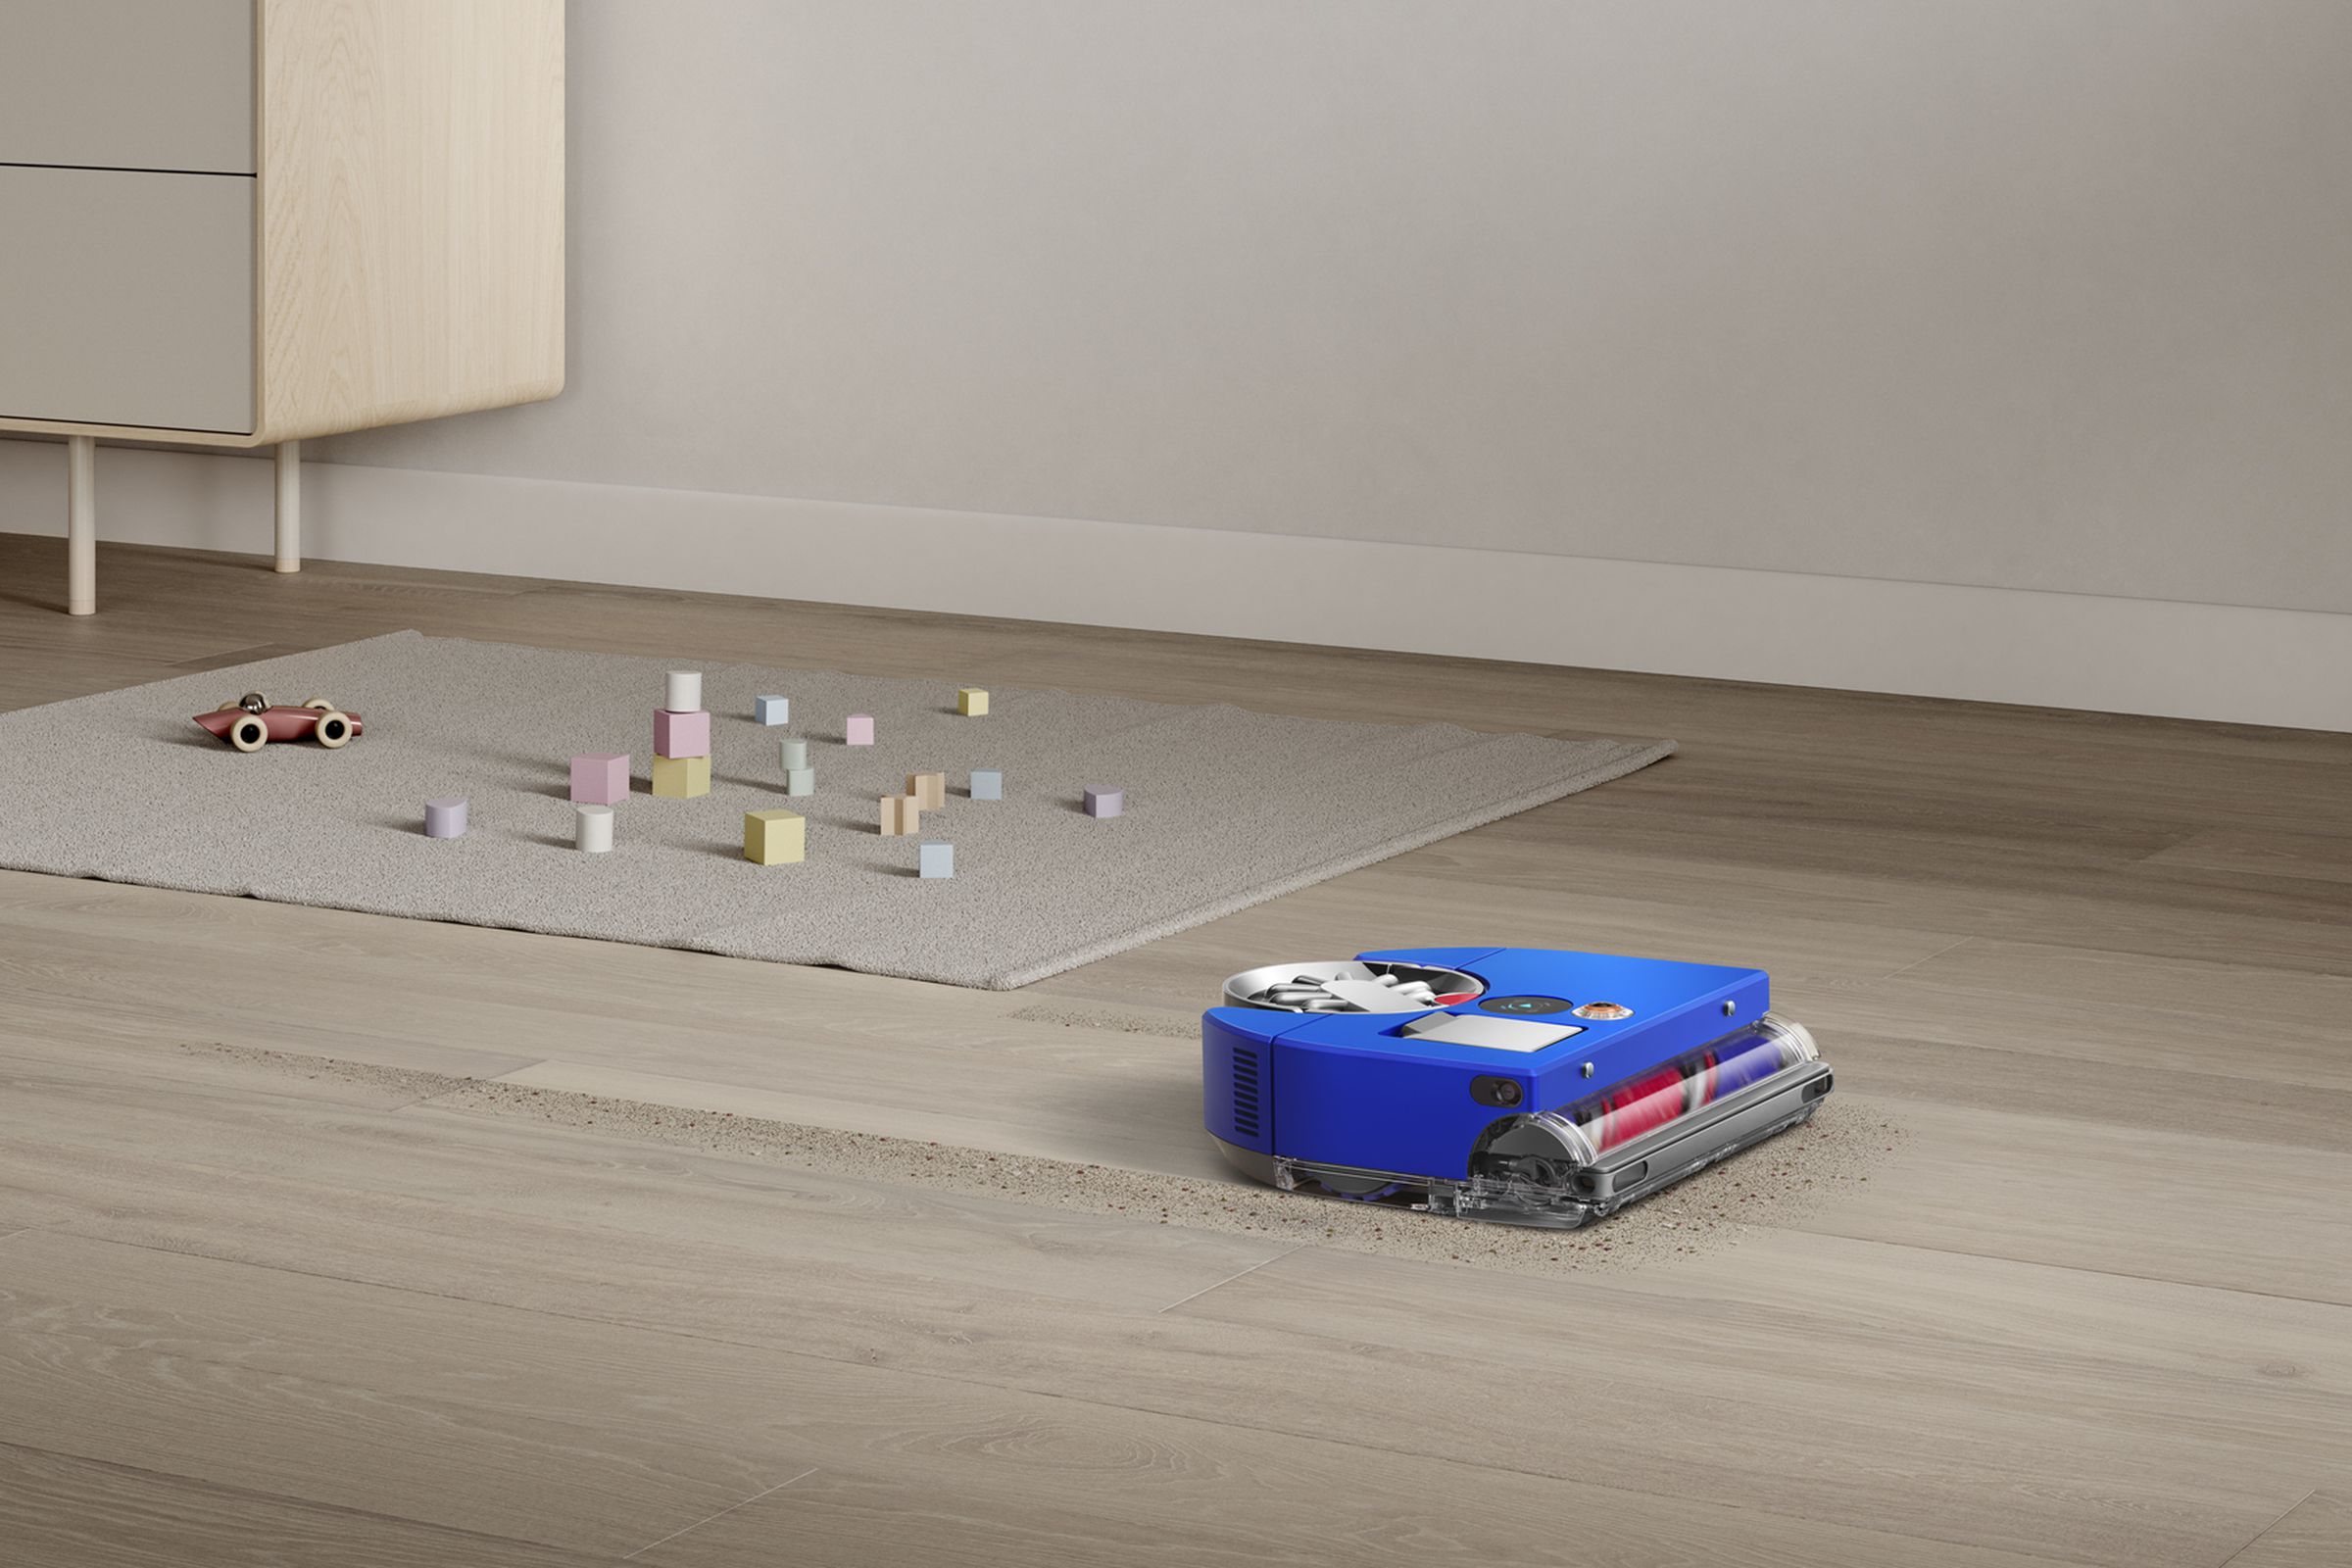 A blue robot vacuum on the floor of a home.